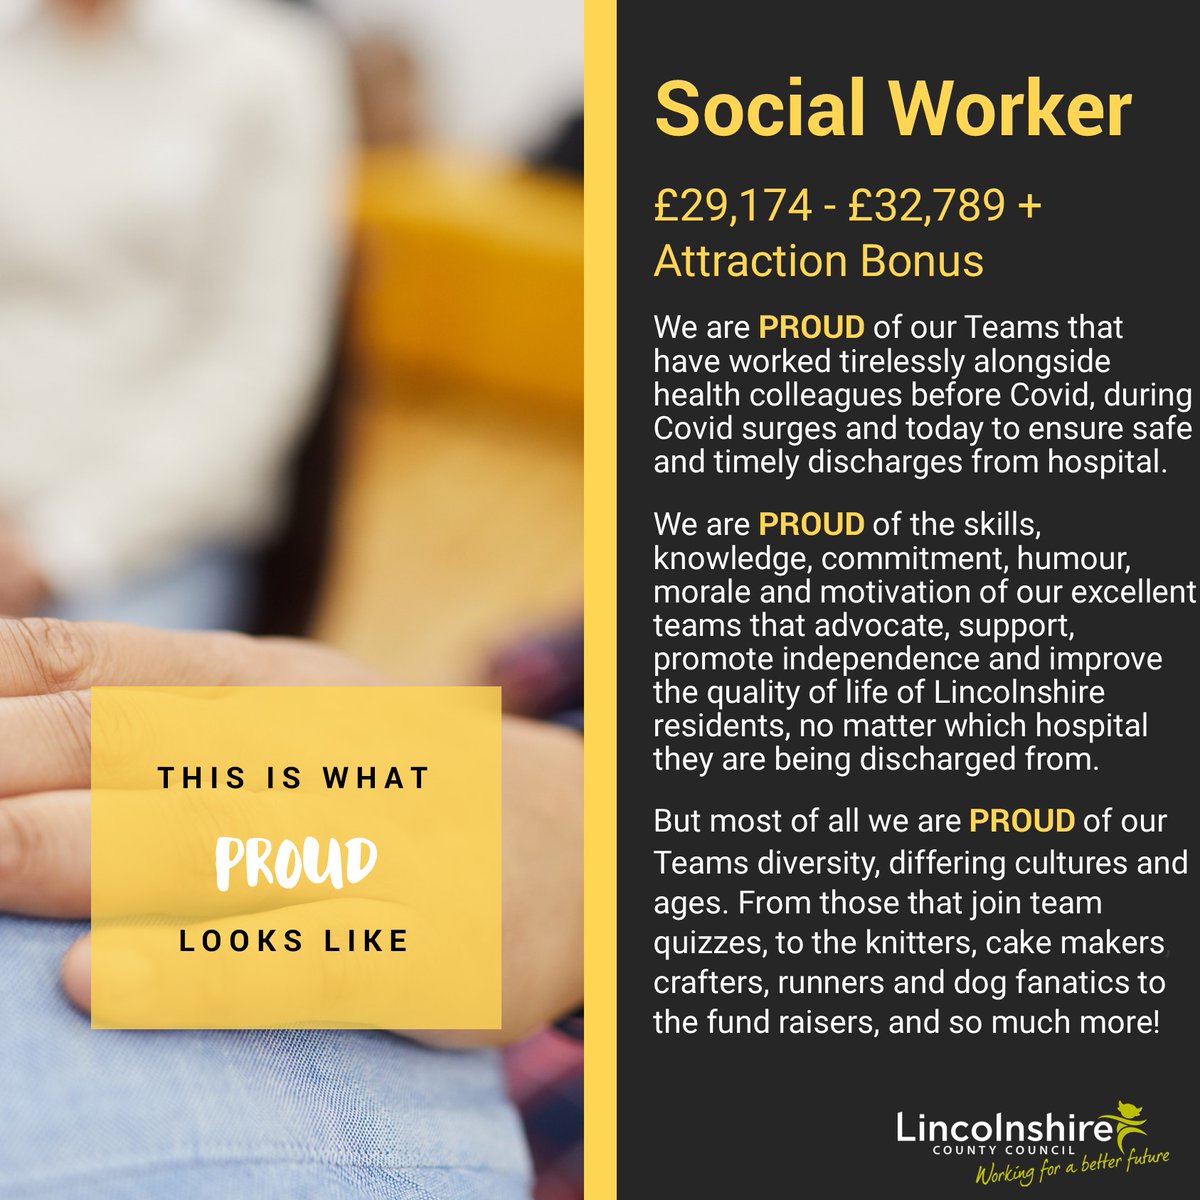 ❗JOB VACANCY❗ Social Worker £29,174 - £32,789 + 15% Attraction Bonus ✅There is still time to apply today! ✅ This position closes Sunday 29th May at midnight. For more information, job descriptions and to apply, click here: tinyurl.com/3rbdhp3u #socialwork #vacancy